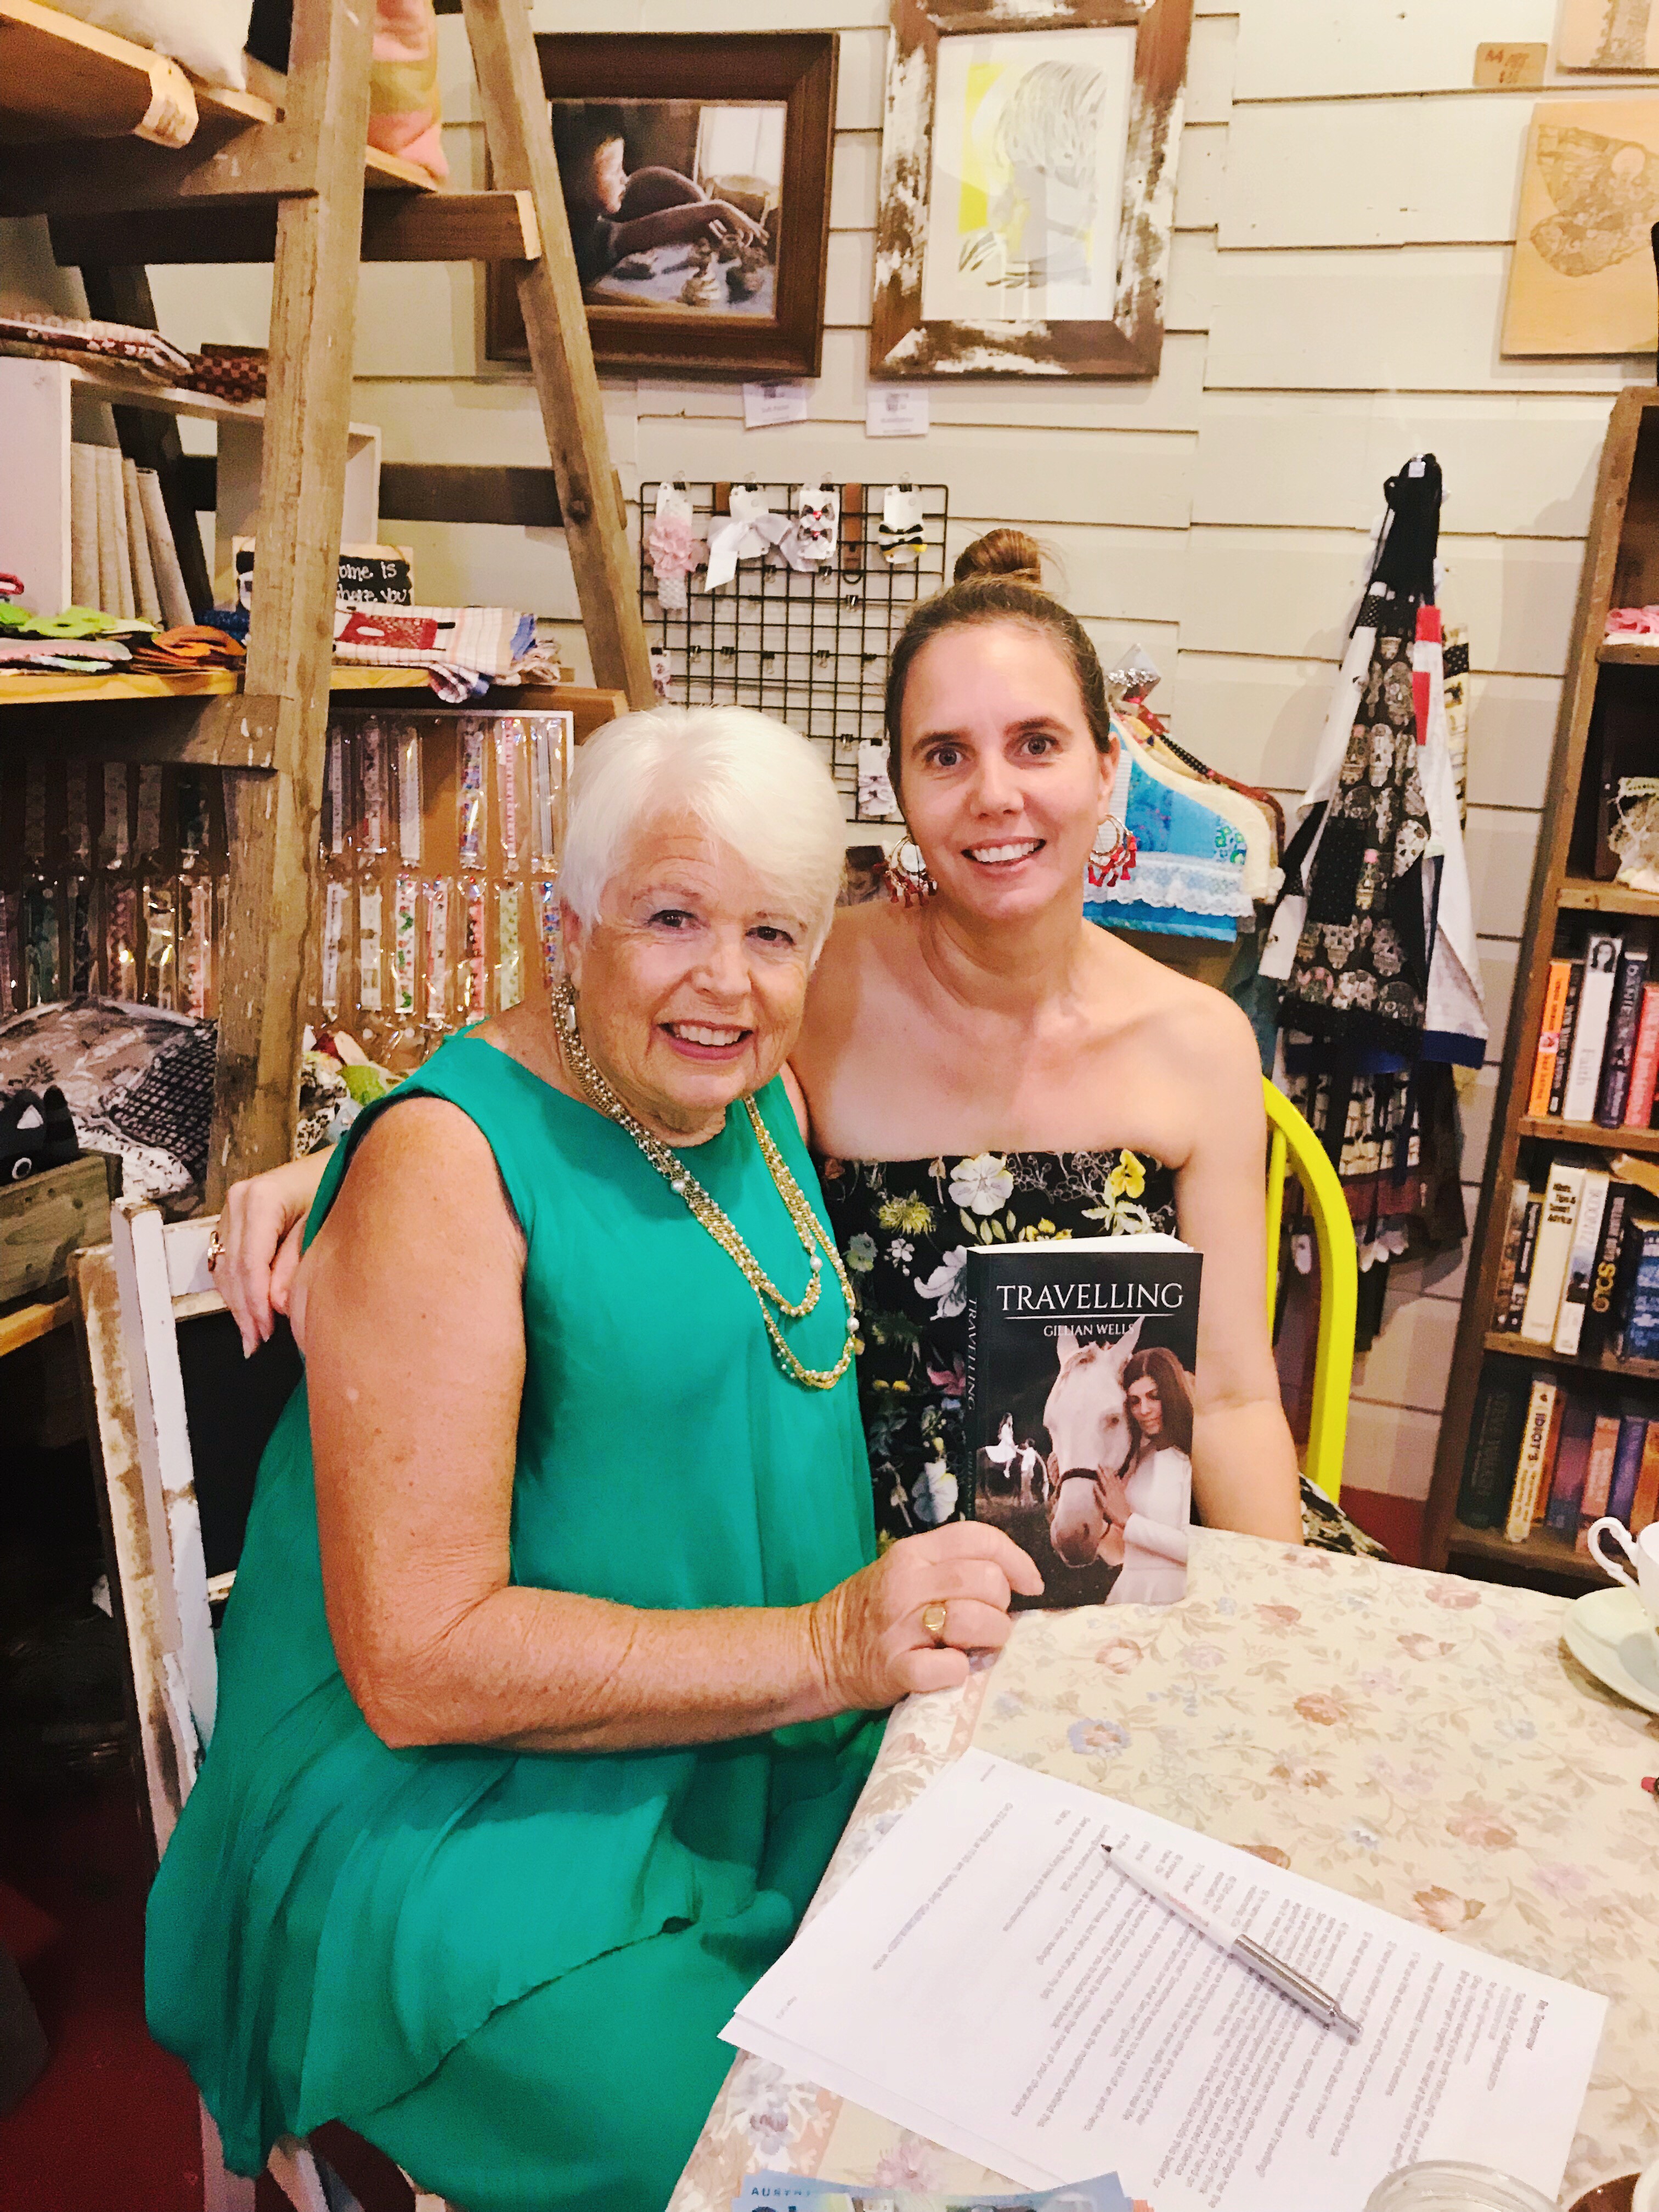 Author Gillian Wells Enjoyed a Successful Book Launch of her Novel, Travelling